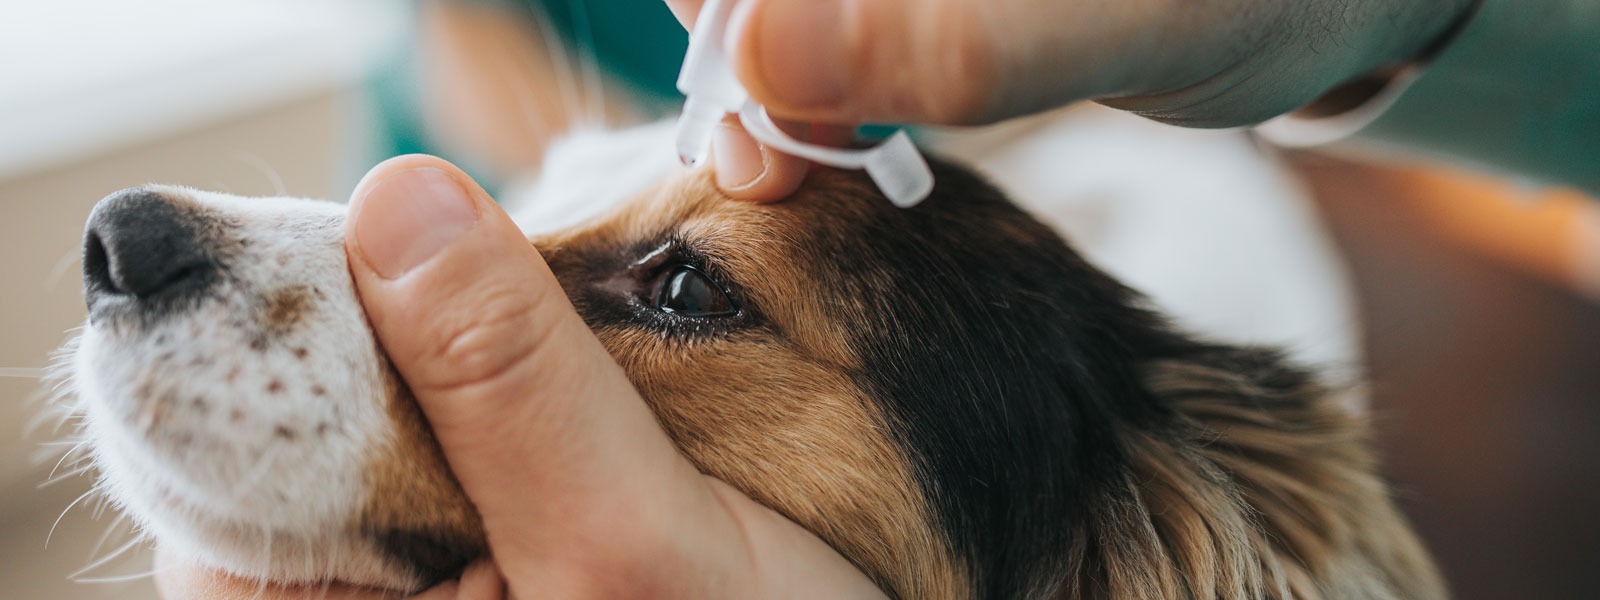 dog with conjunctivitis being treated with drops